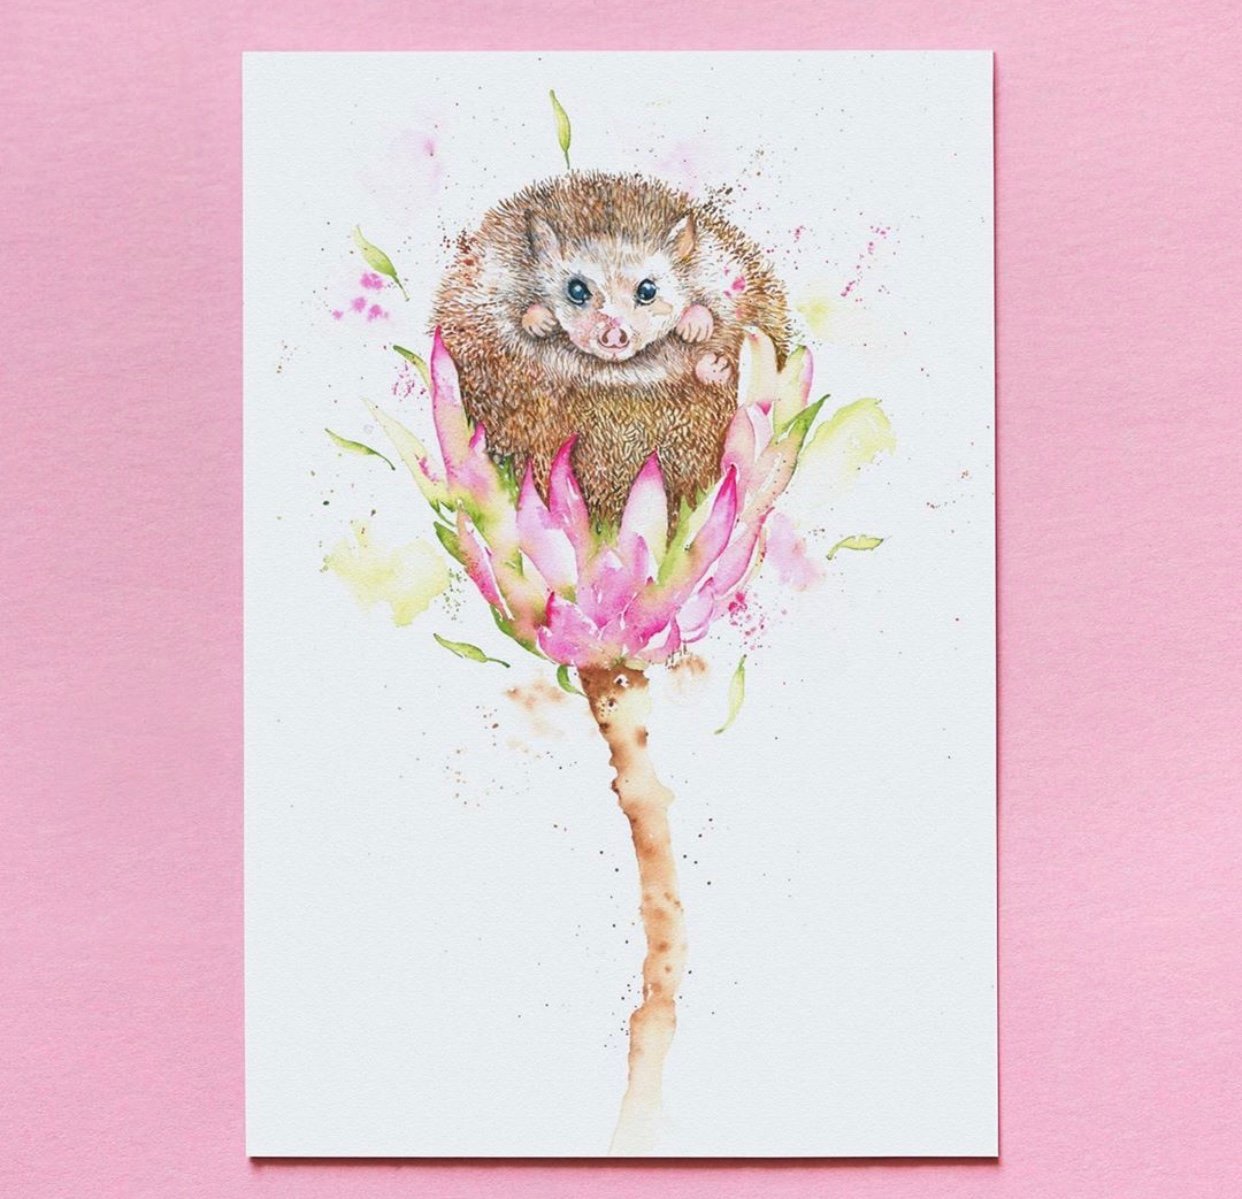 Image of Henry, the cute baby Hedgehog with FREE SHIPPING